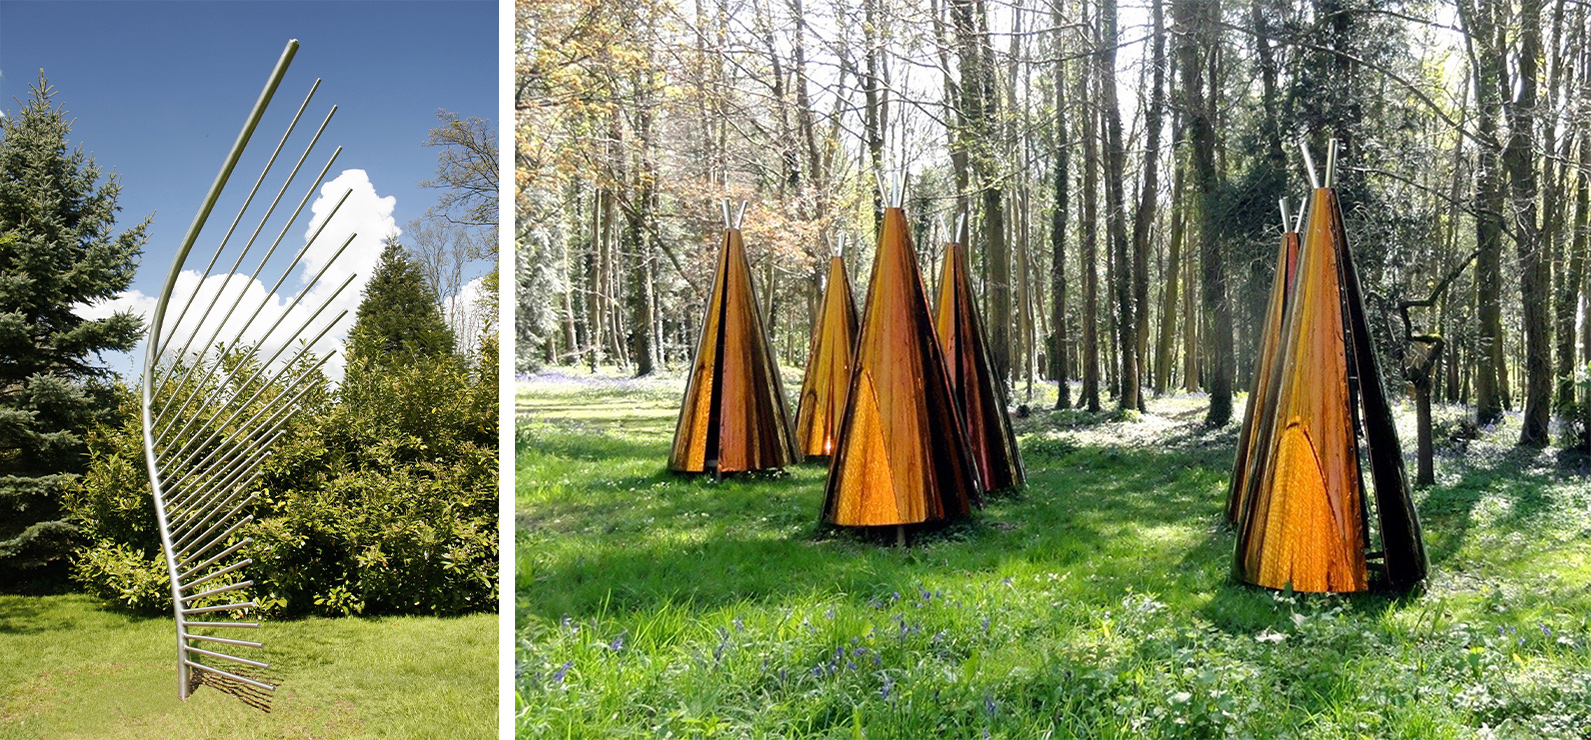 Left: Mountains sculpture, steel mirrored pointy shapes in the shape of a mountain. Right: copper coloured cones